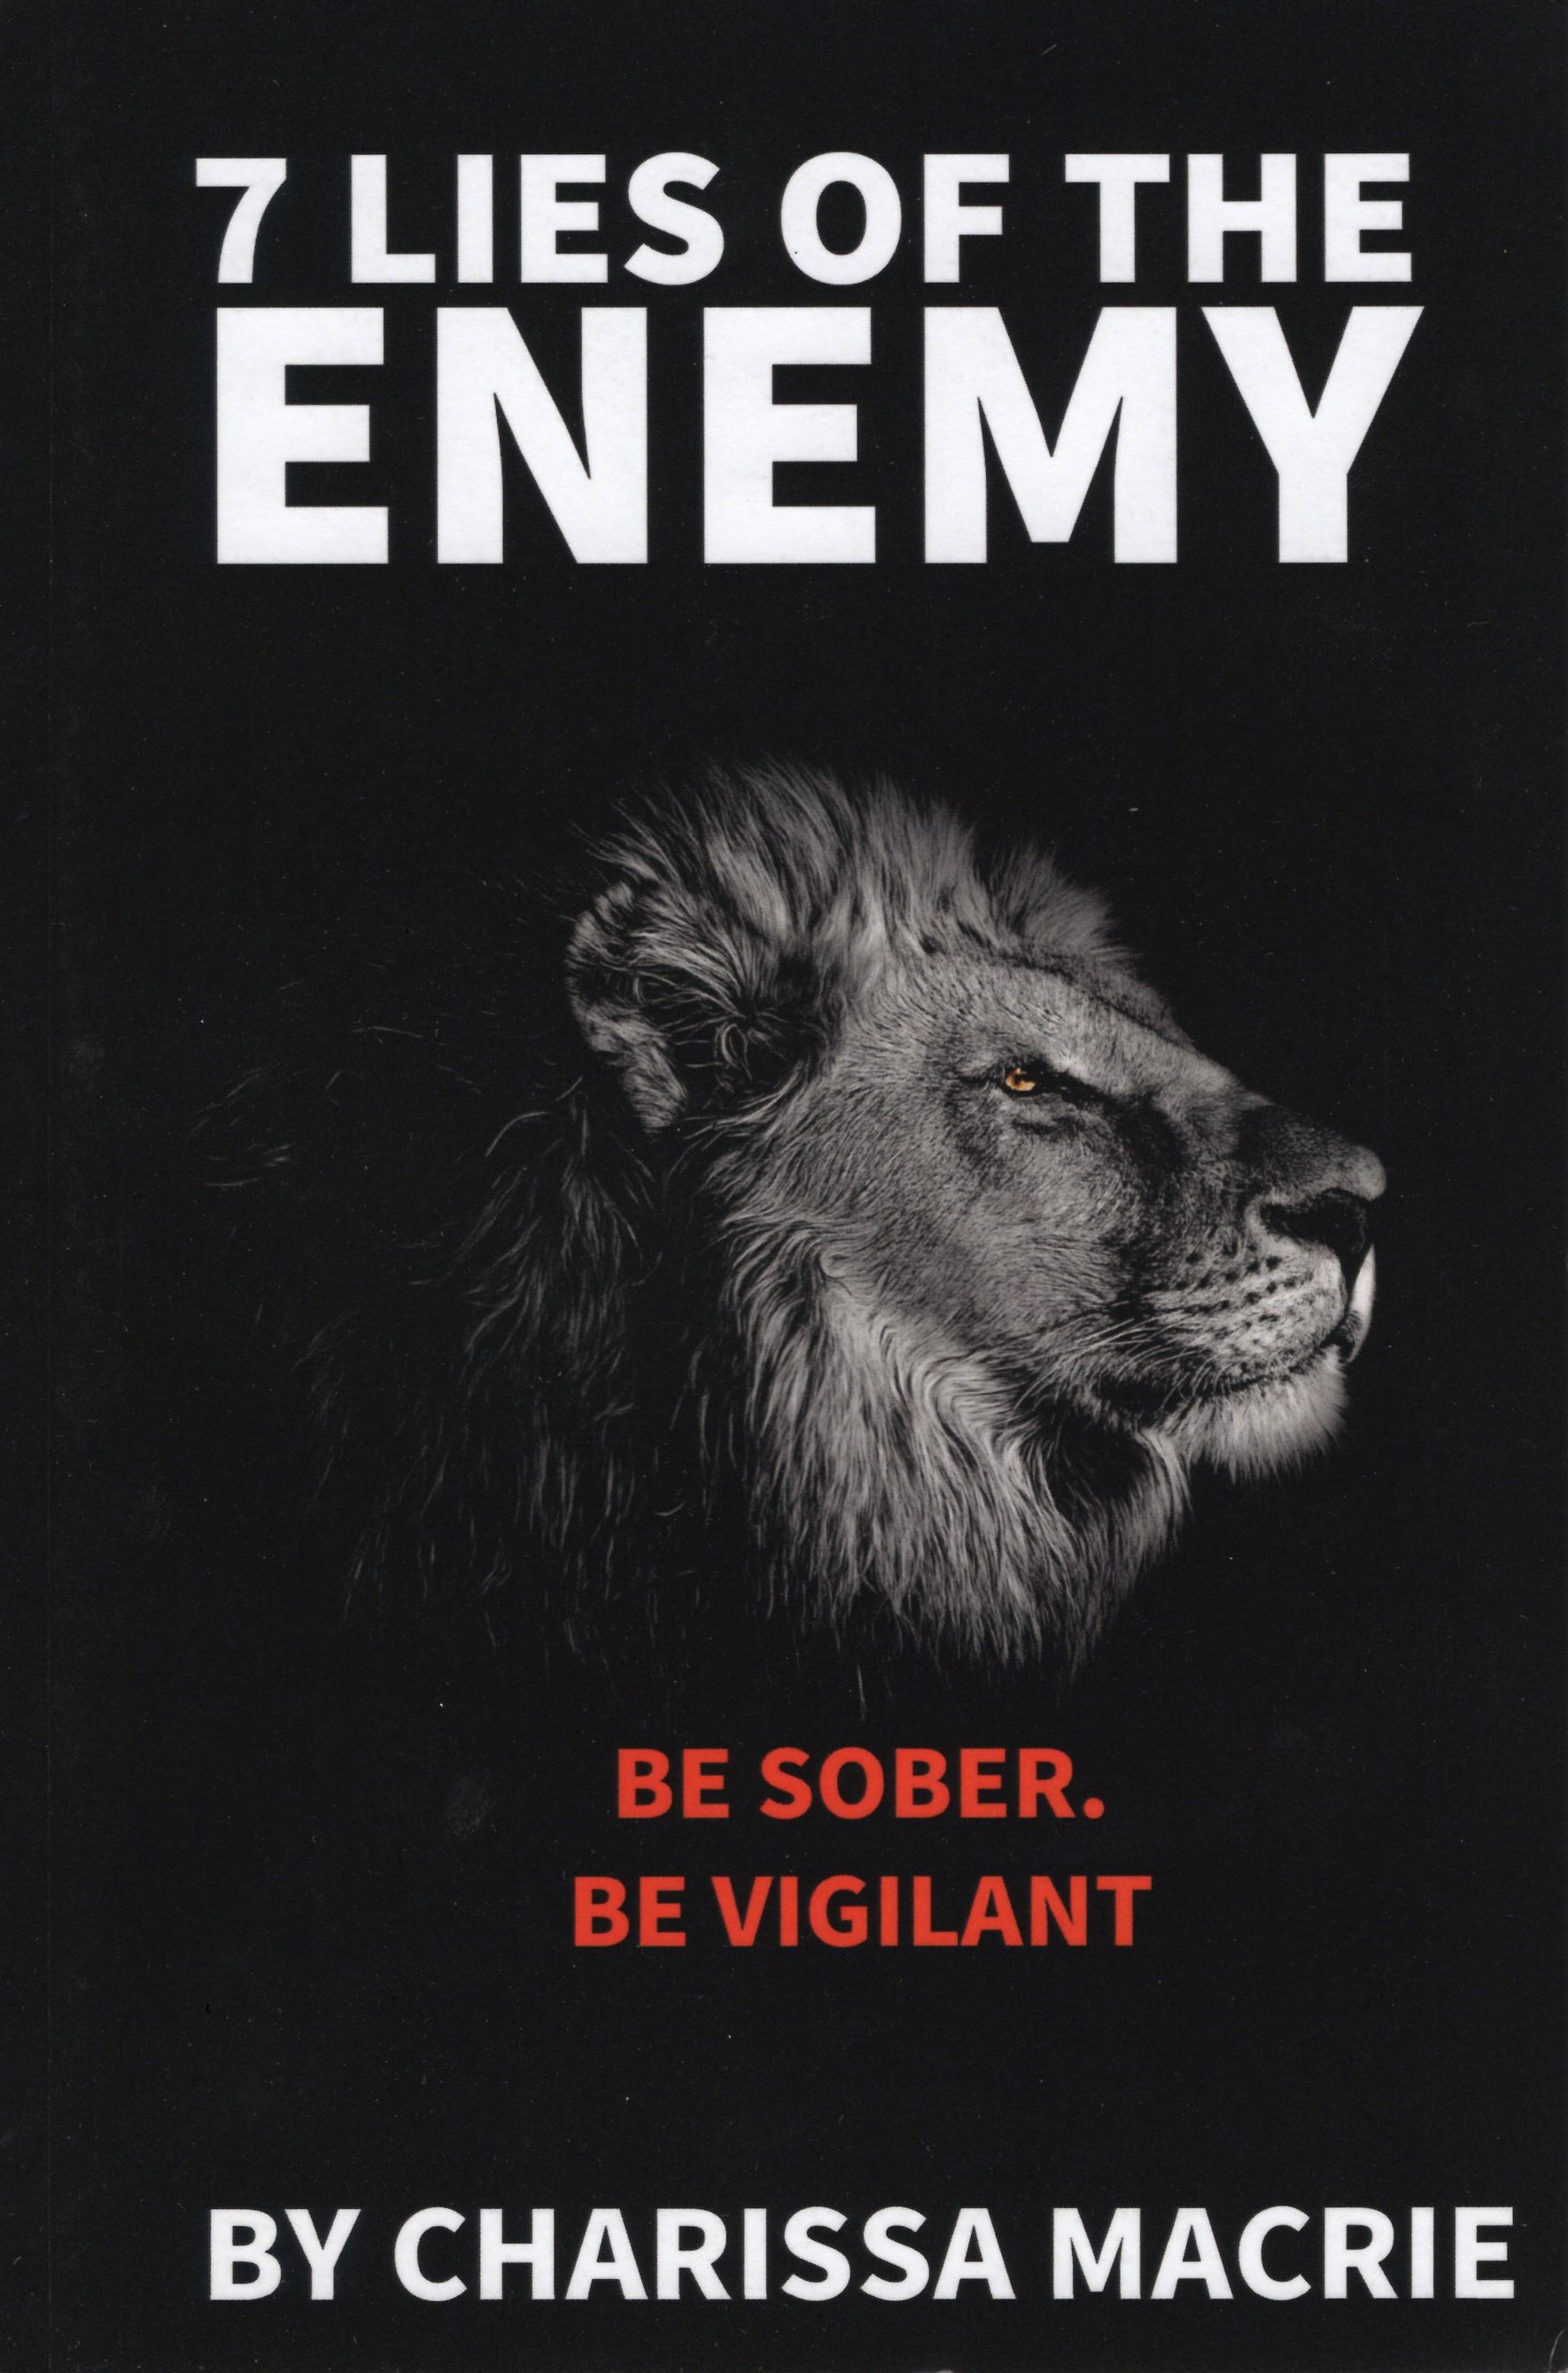 7 Lies of the Enemy - Charissa Macrie